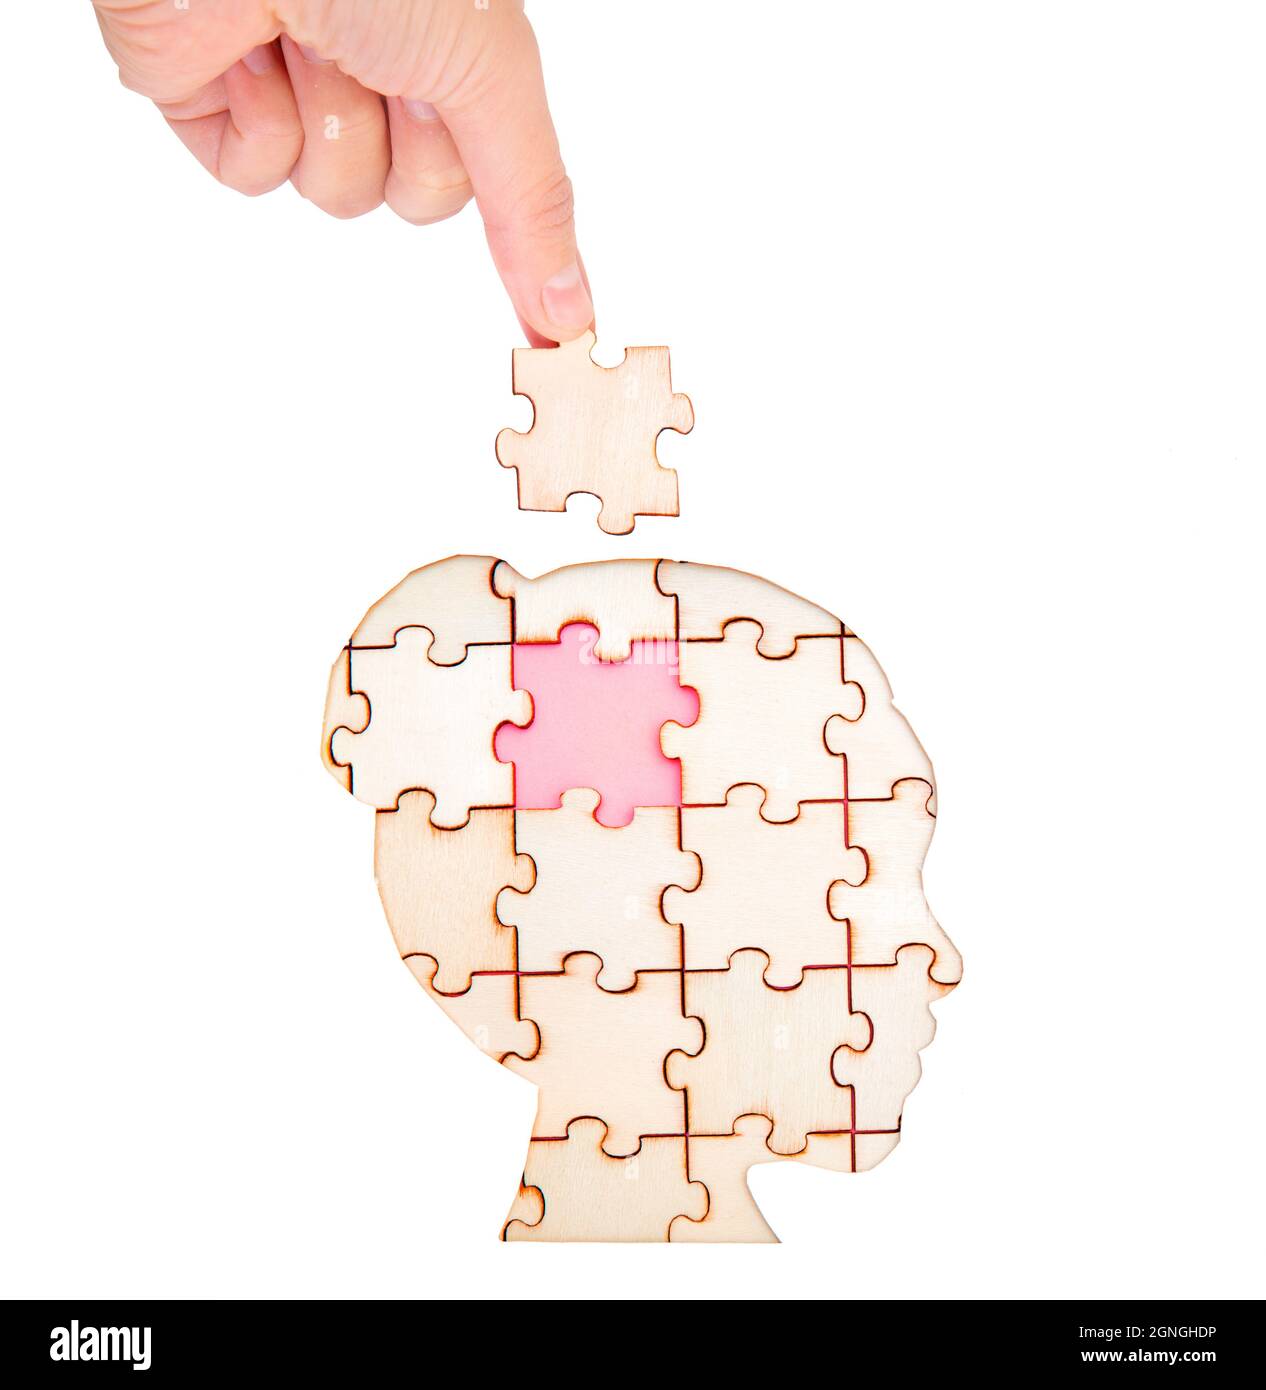 Placing the missing brain piece of the jigsaw puzzle forming a woman's head isolated on white. Psychotherapy concept. Stock Photo